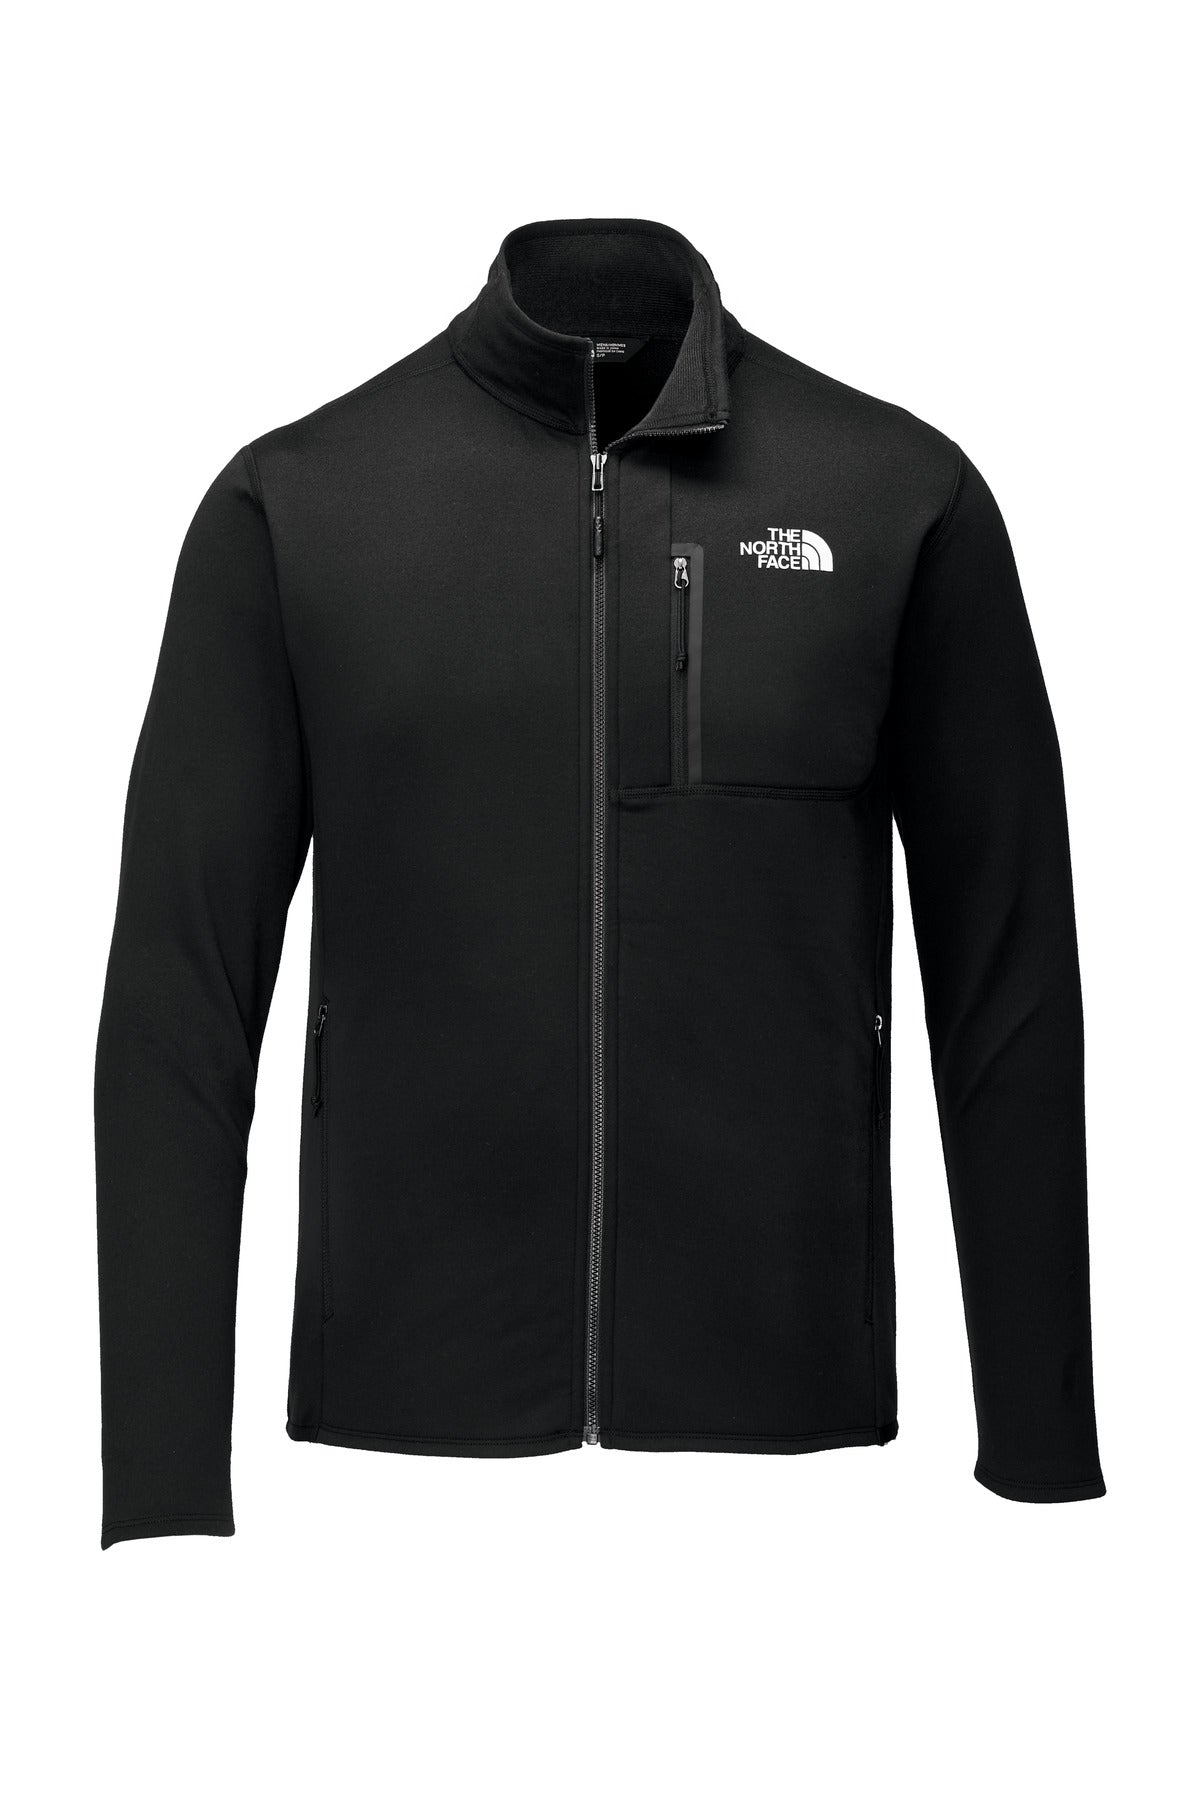 The North Face® Skyline Full-Zip Fleece Jacket NF0A7V64 – On Game Day